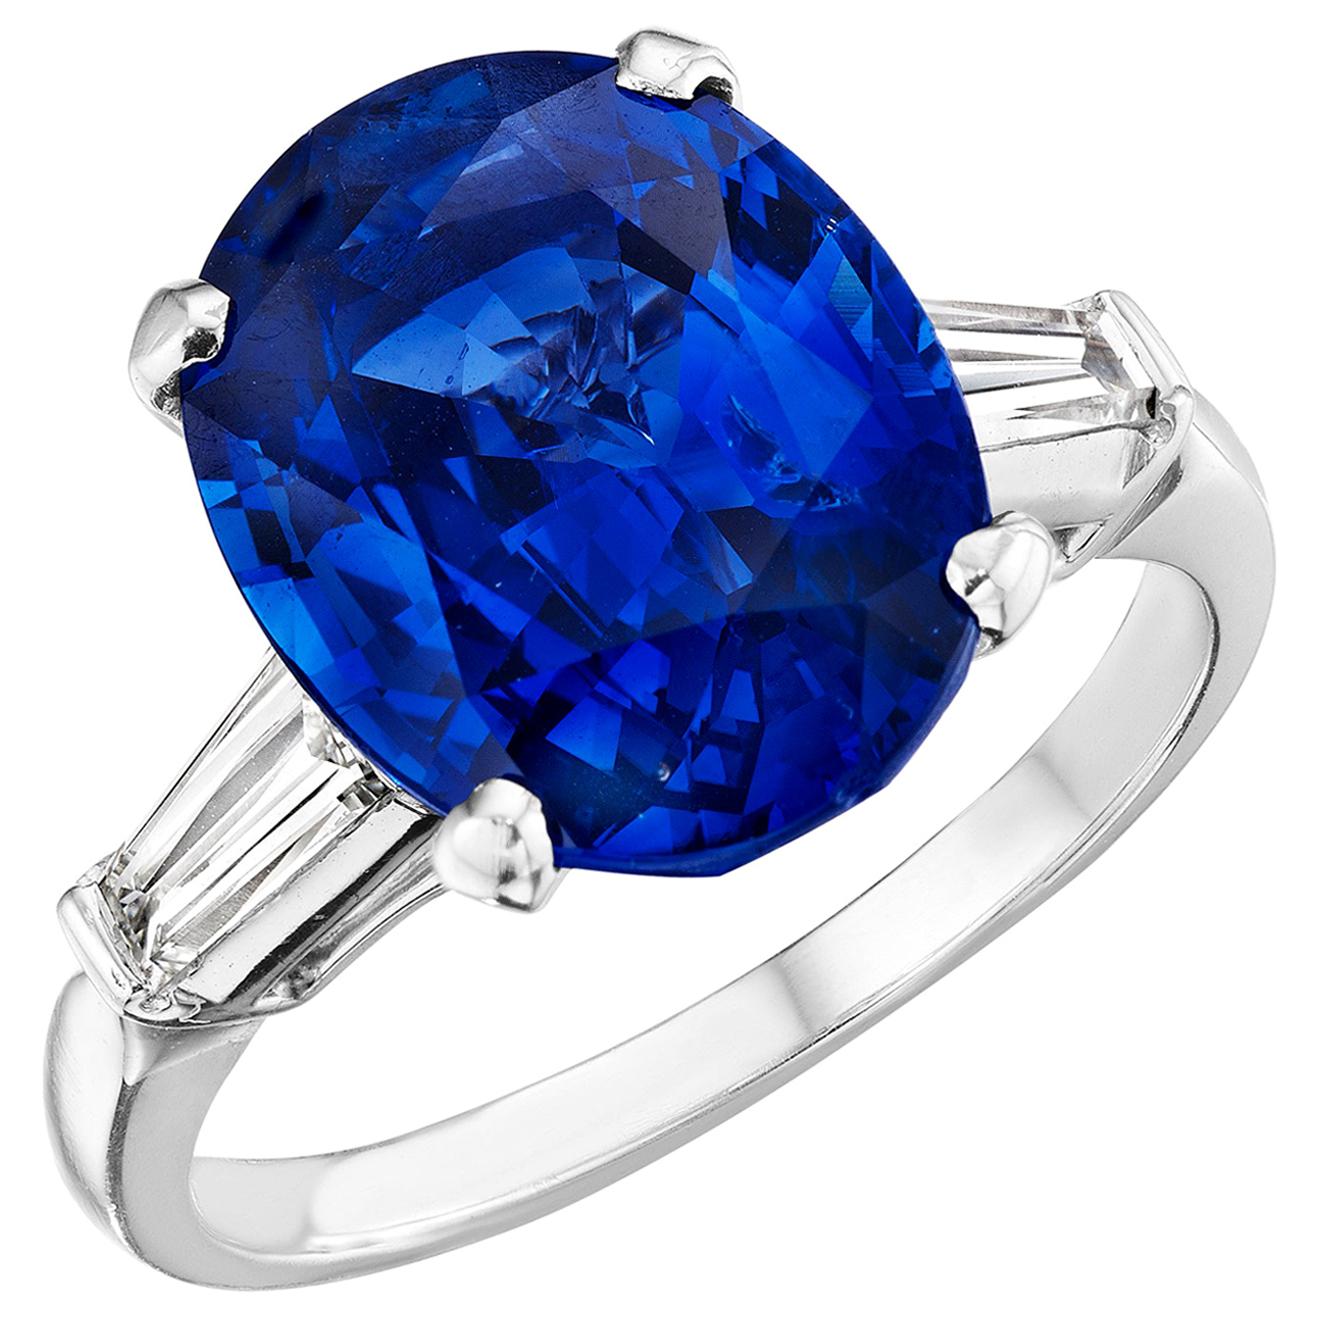 6.04 Carat Oval Sapphire with Trapeze Side Diamonds in Platinum